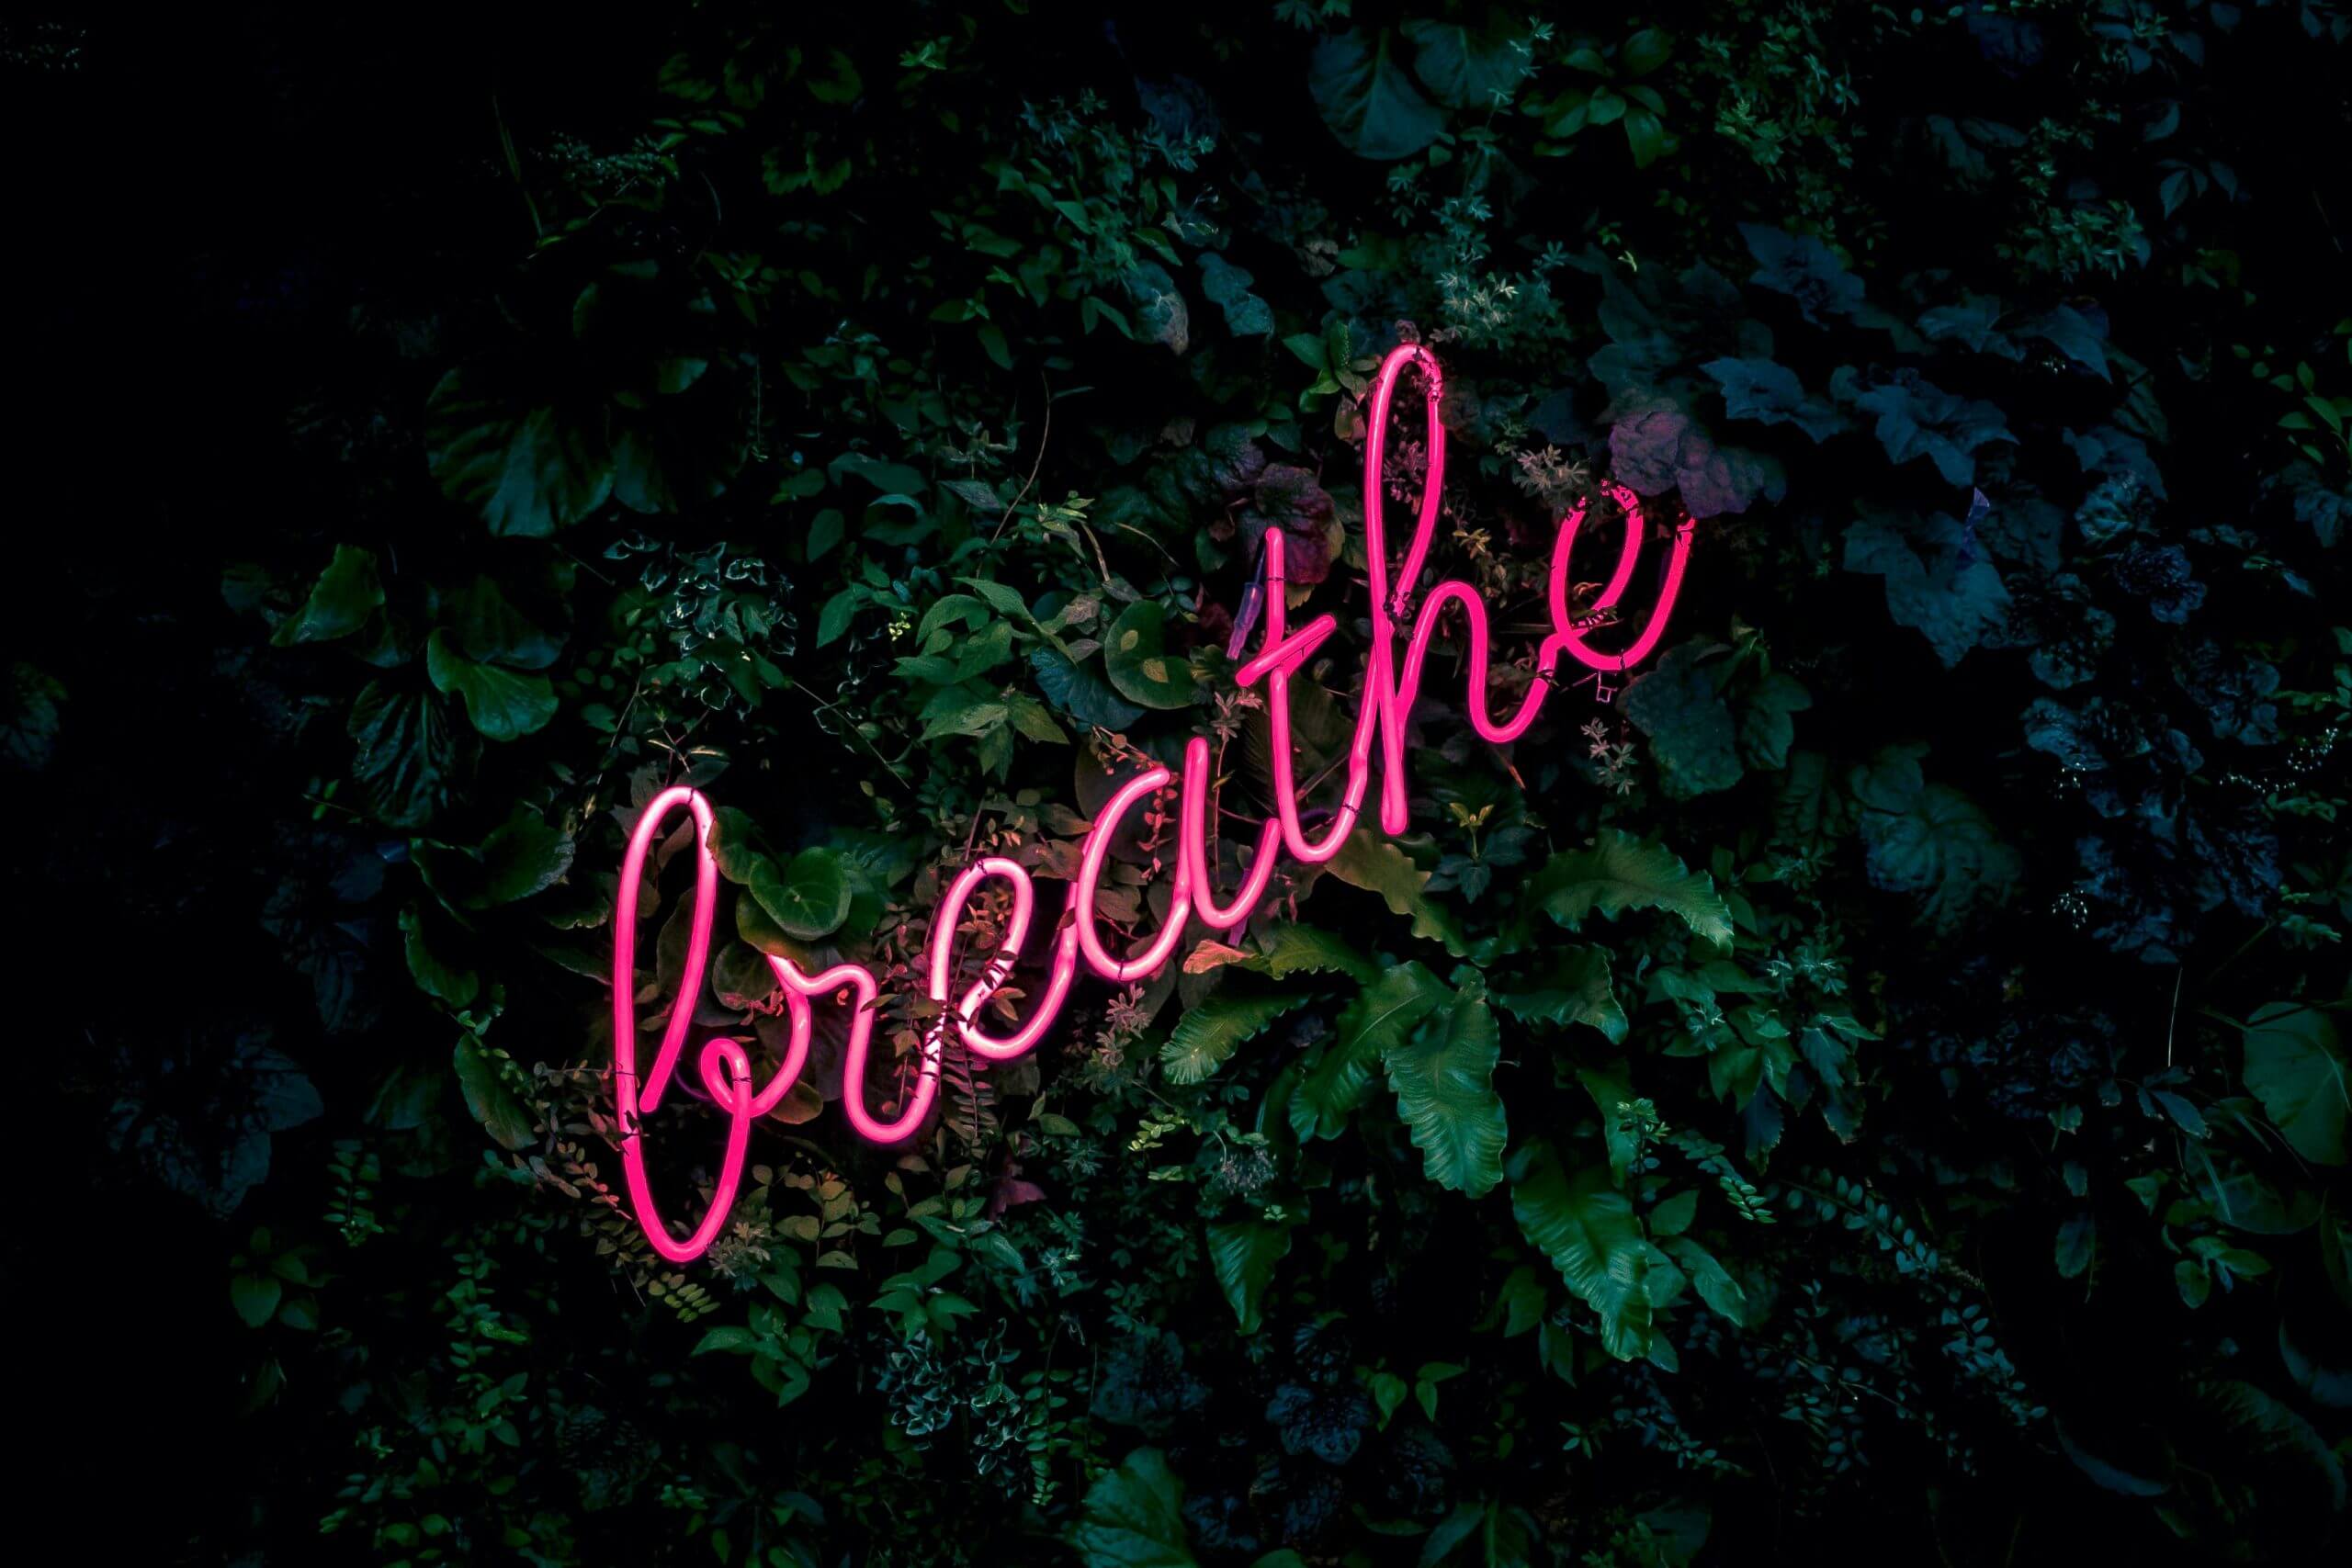 Apply Breathwork to Your Life